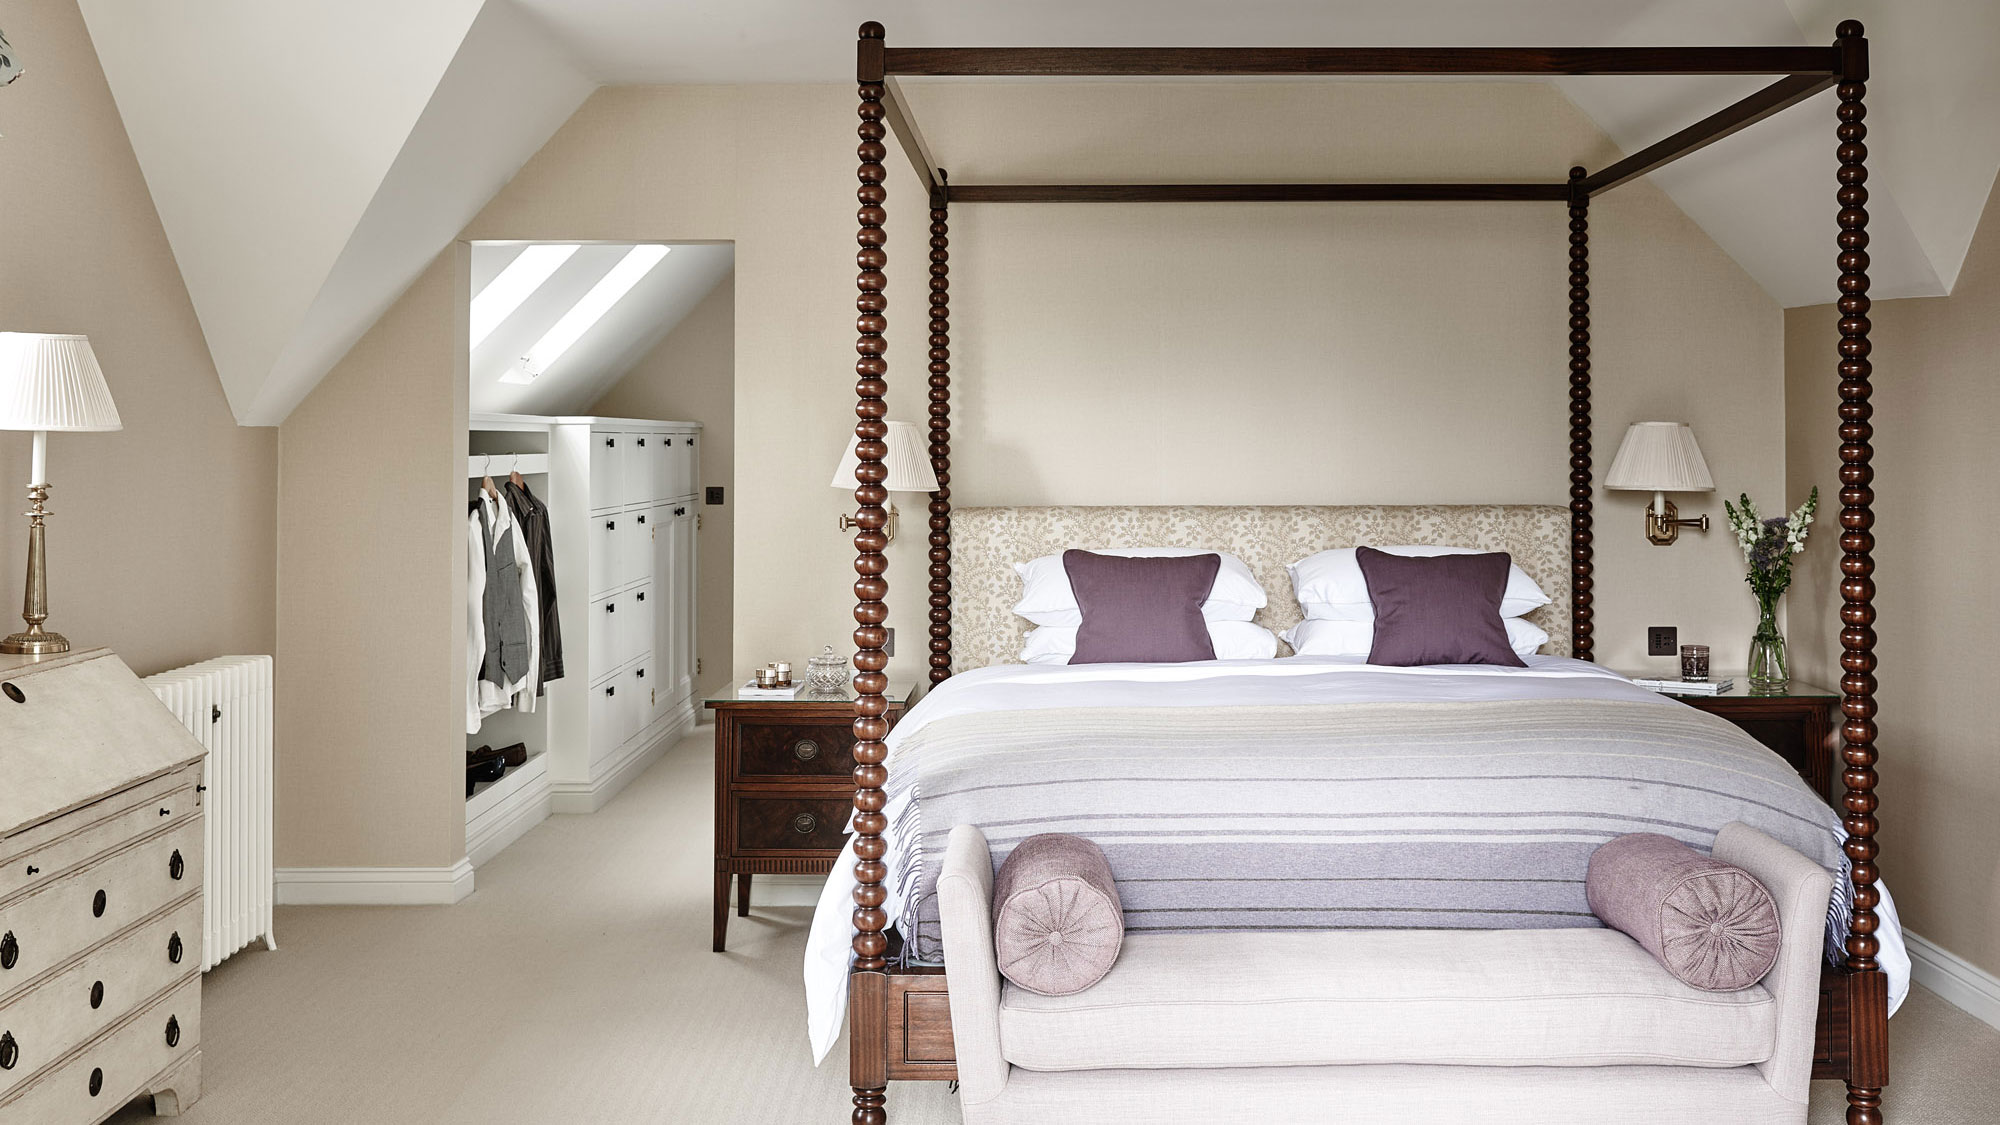 Walk-In Closet Ideas: 22 Ways To Introduce Luxury Storage And Dressing  Space |